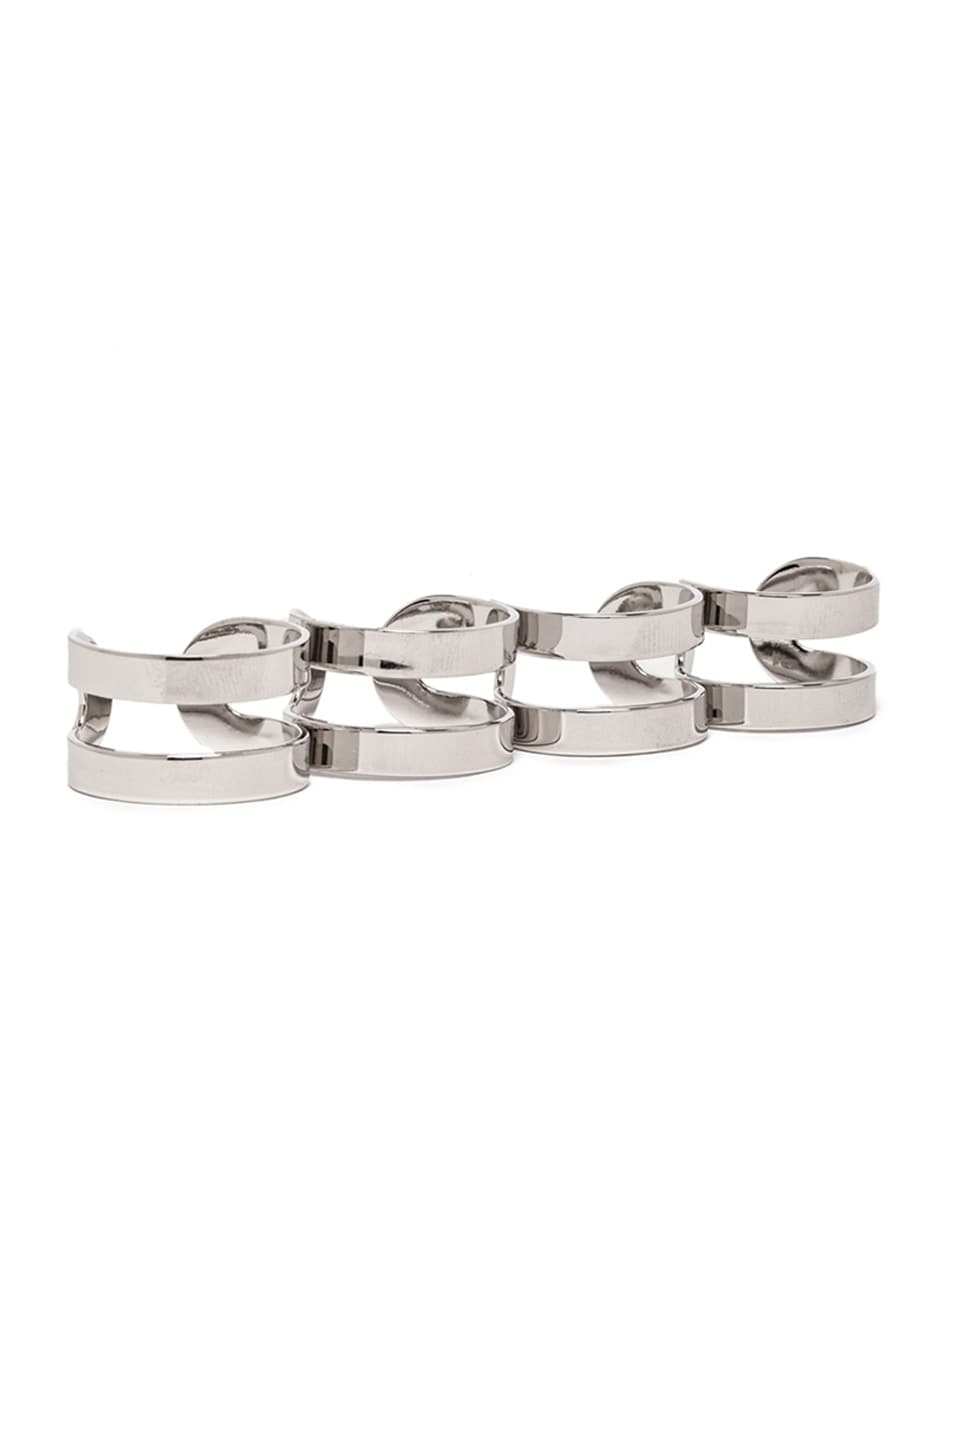 Image 1 of Maison Margiela Cut Out Ring Set in Bight Silver